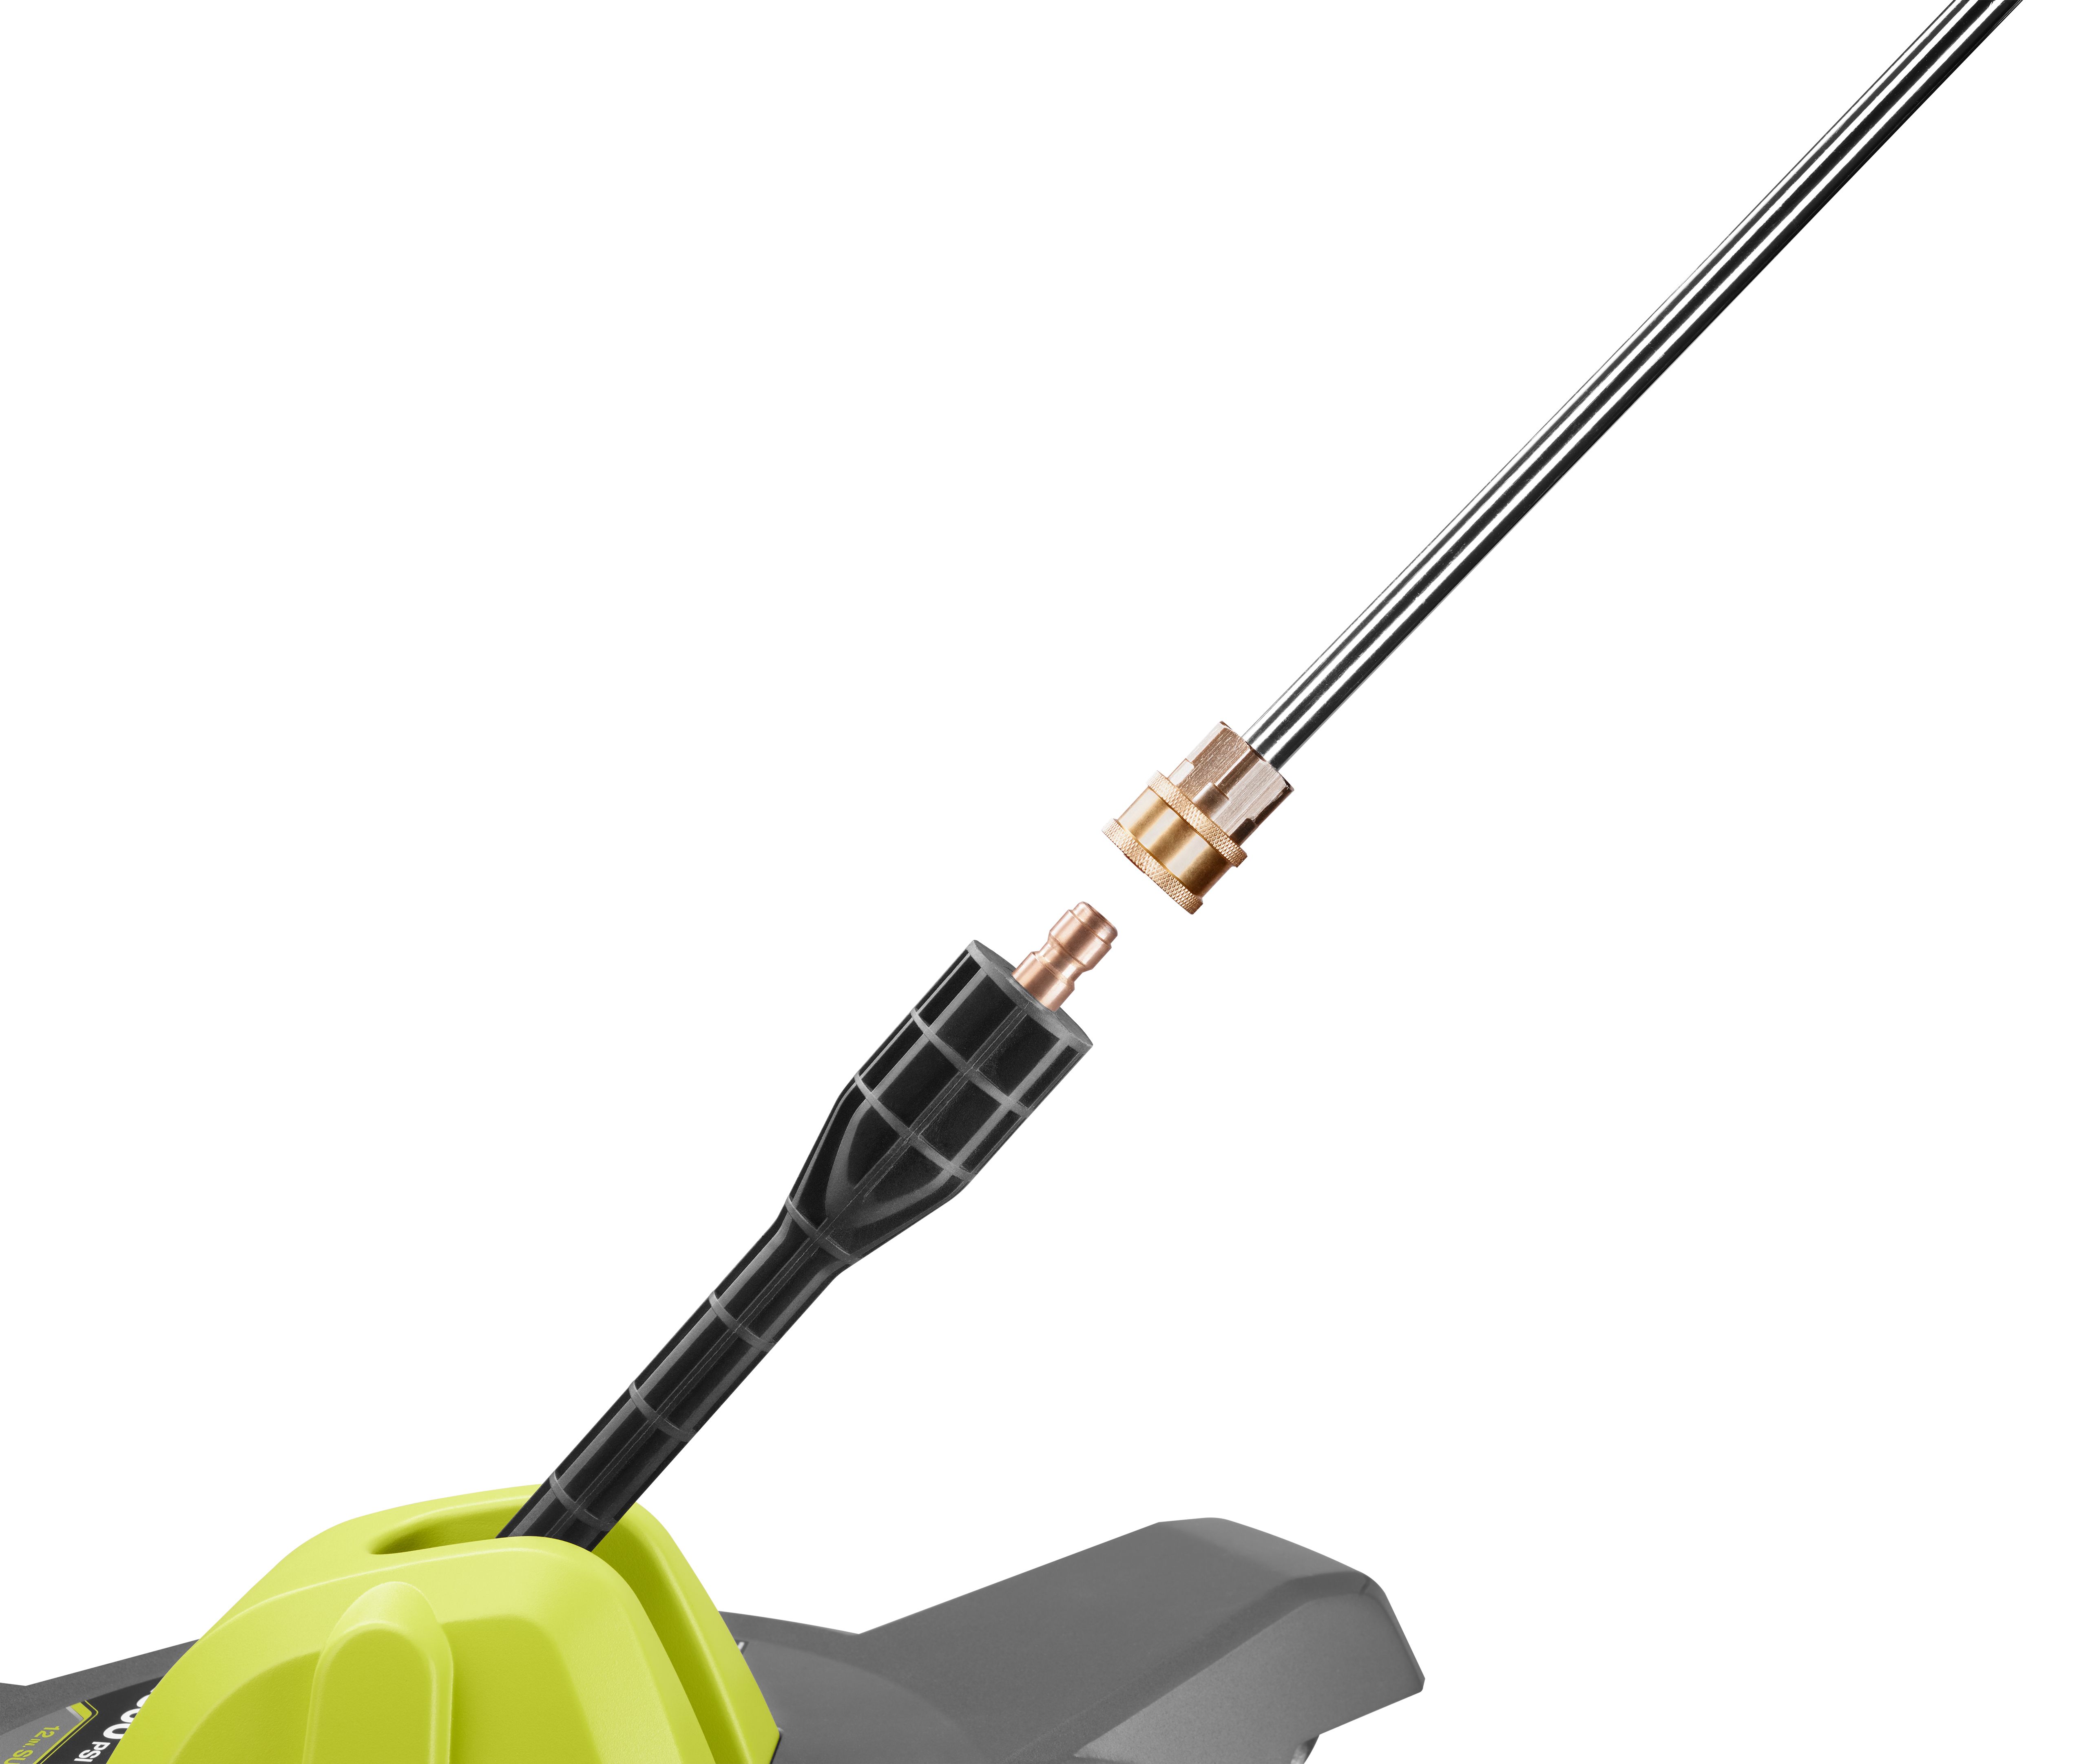 Easily Connect to your Pressure Washer